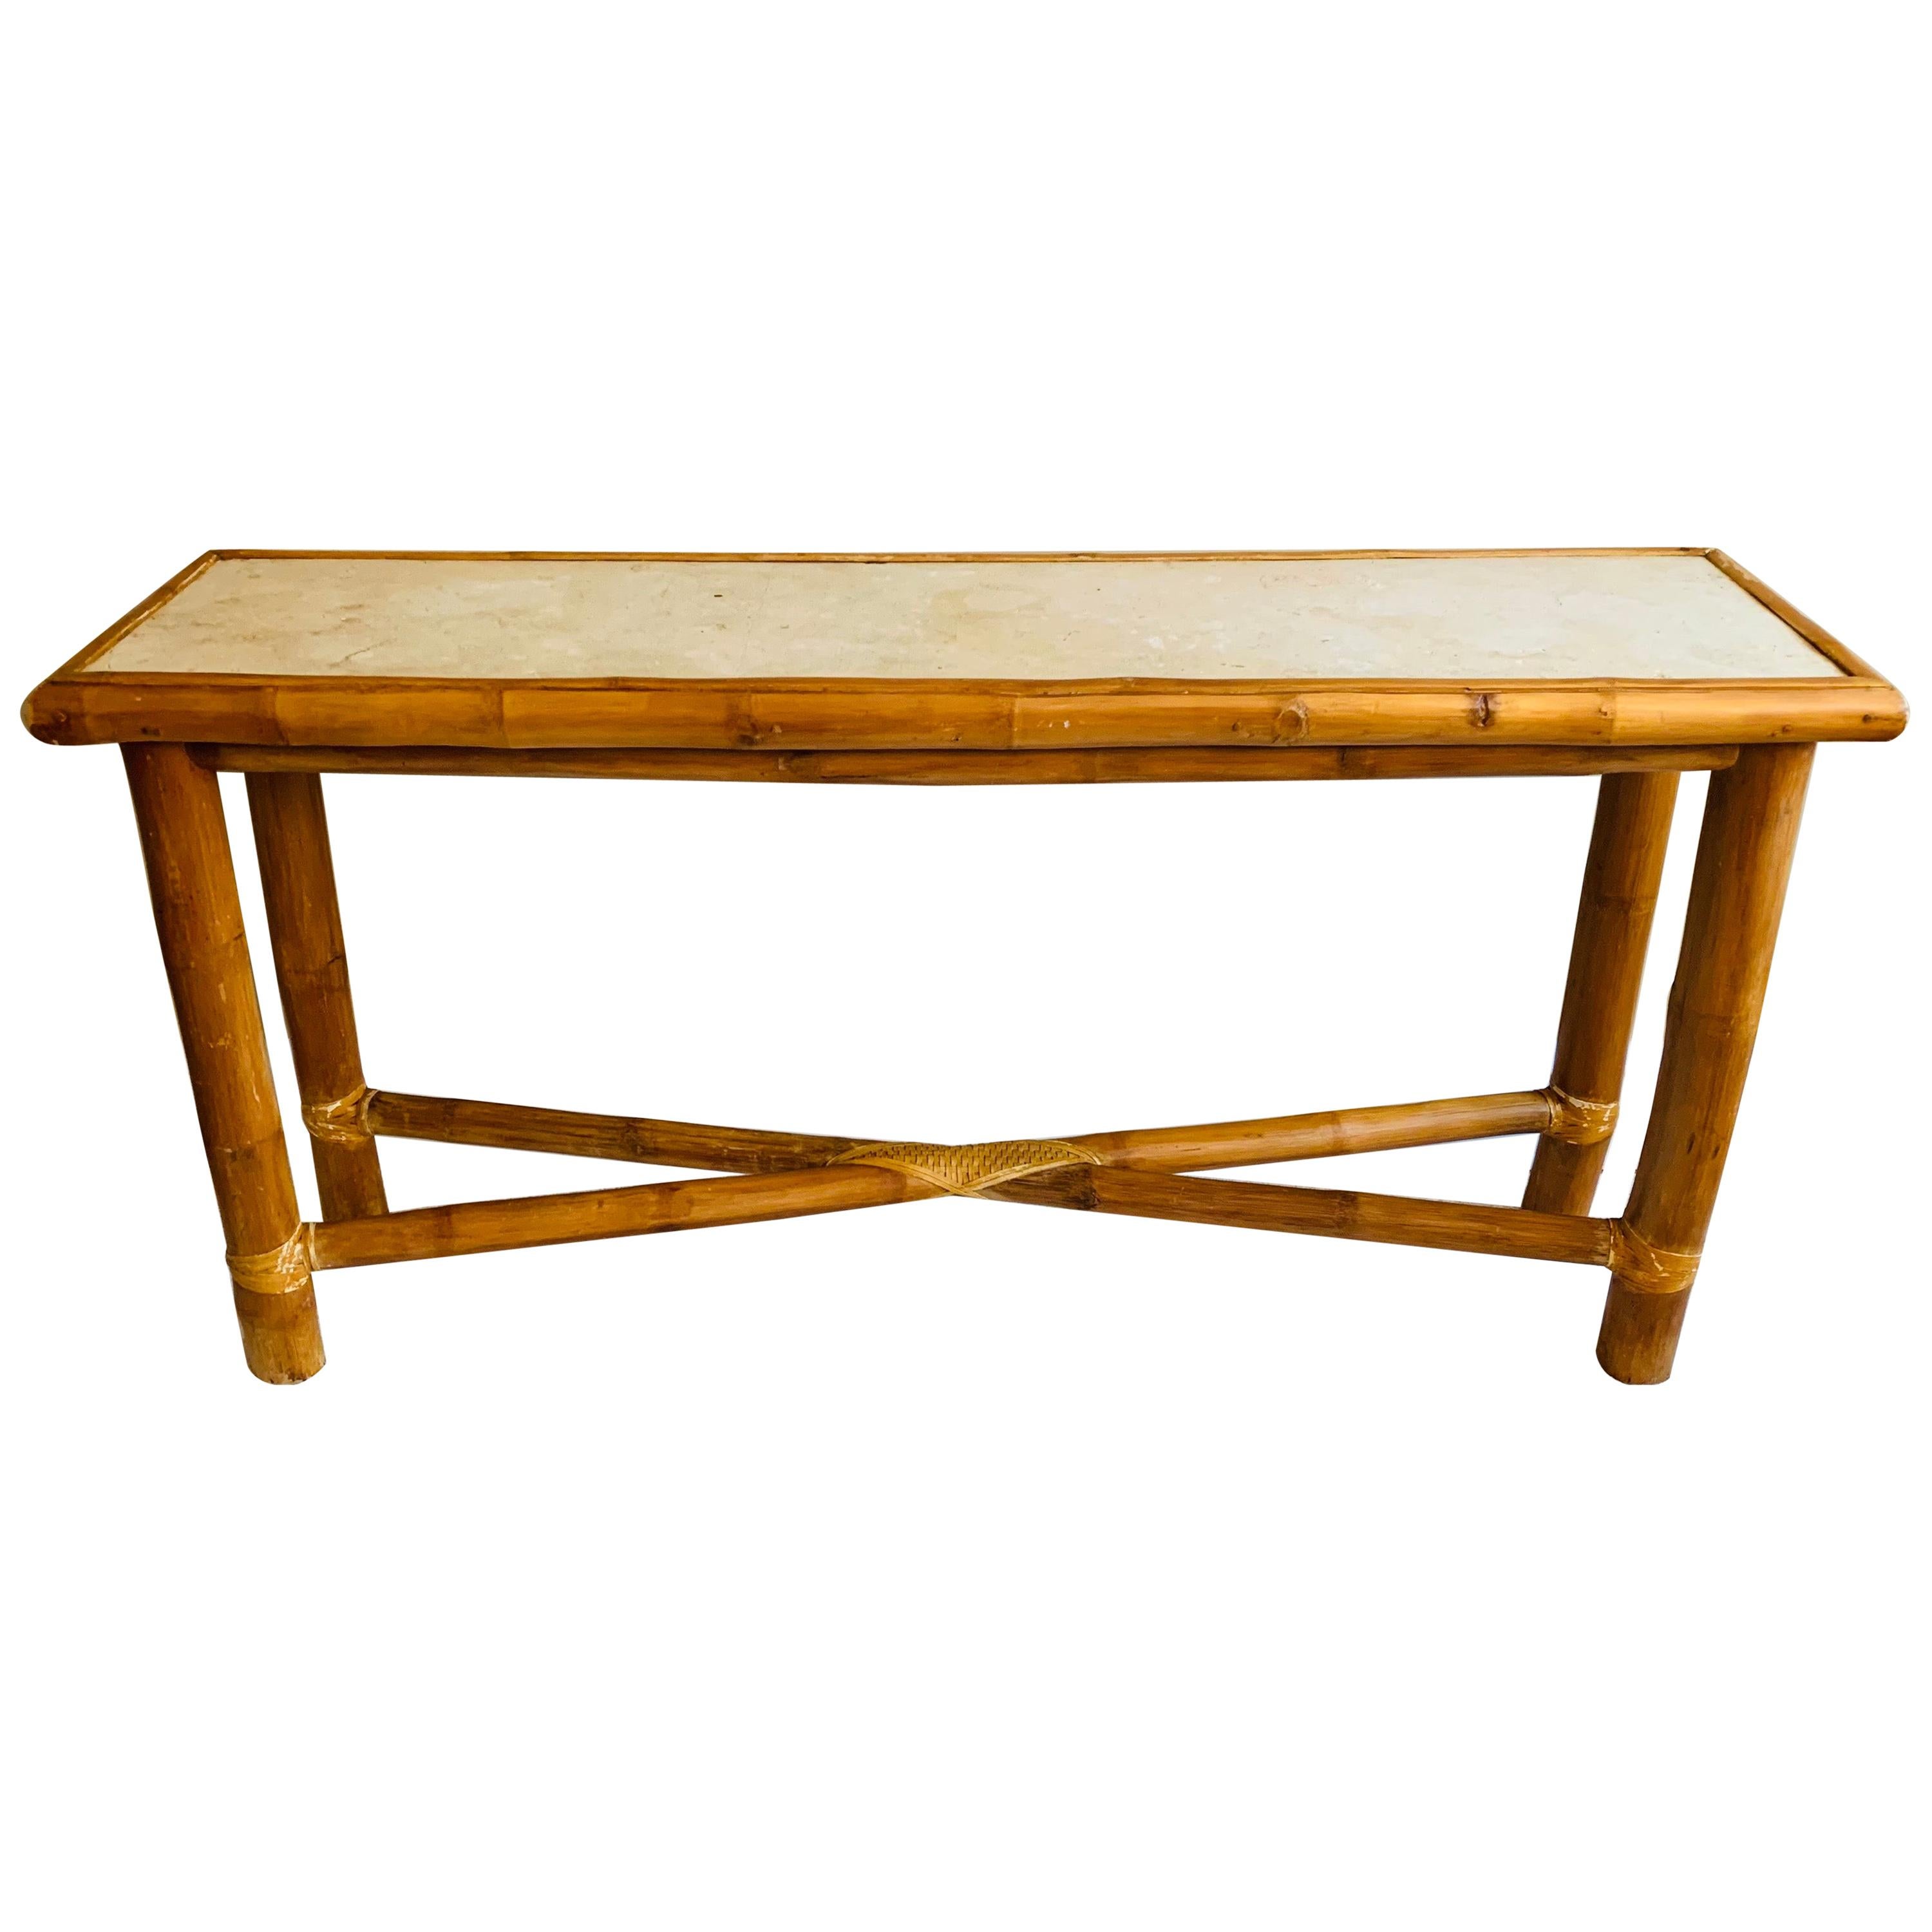 Vintage Bamboo Console Table with Stone Top in the Style of Budji Layug